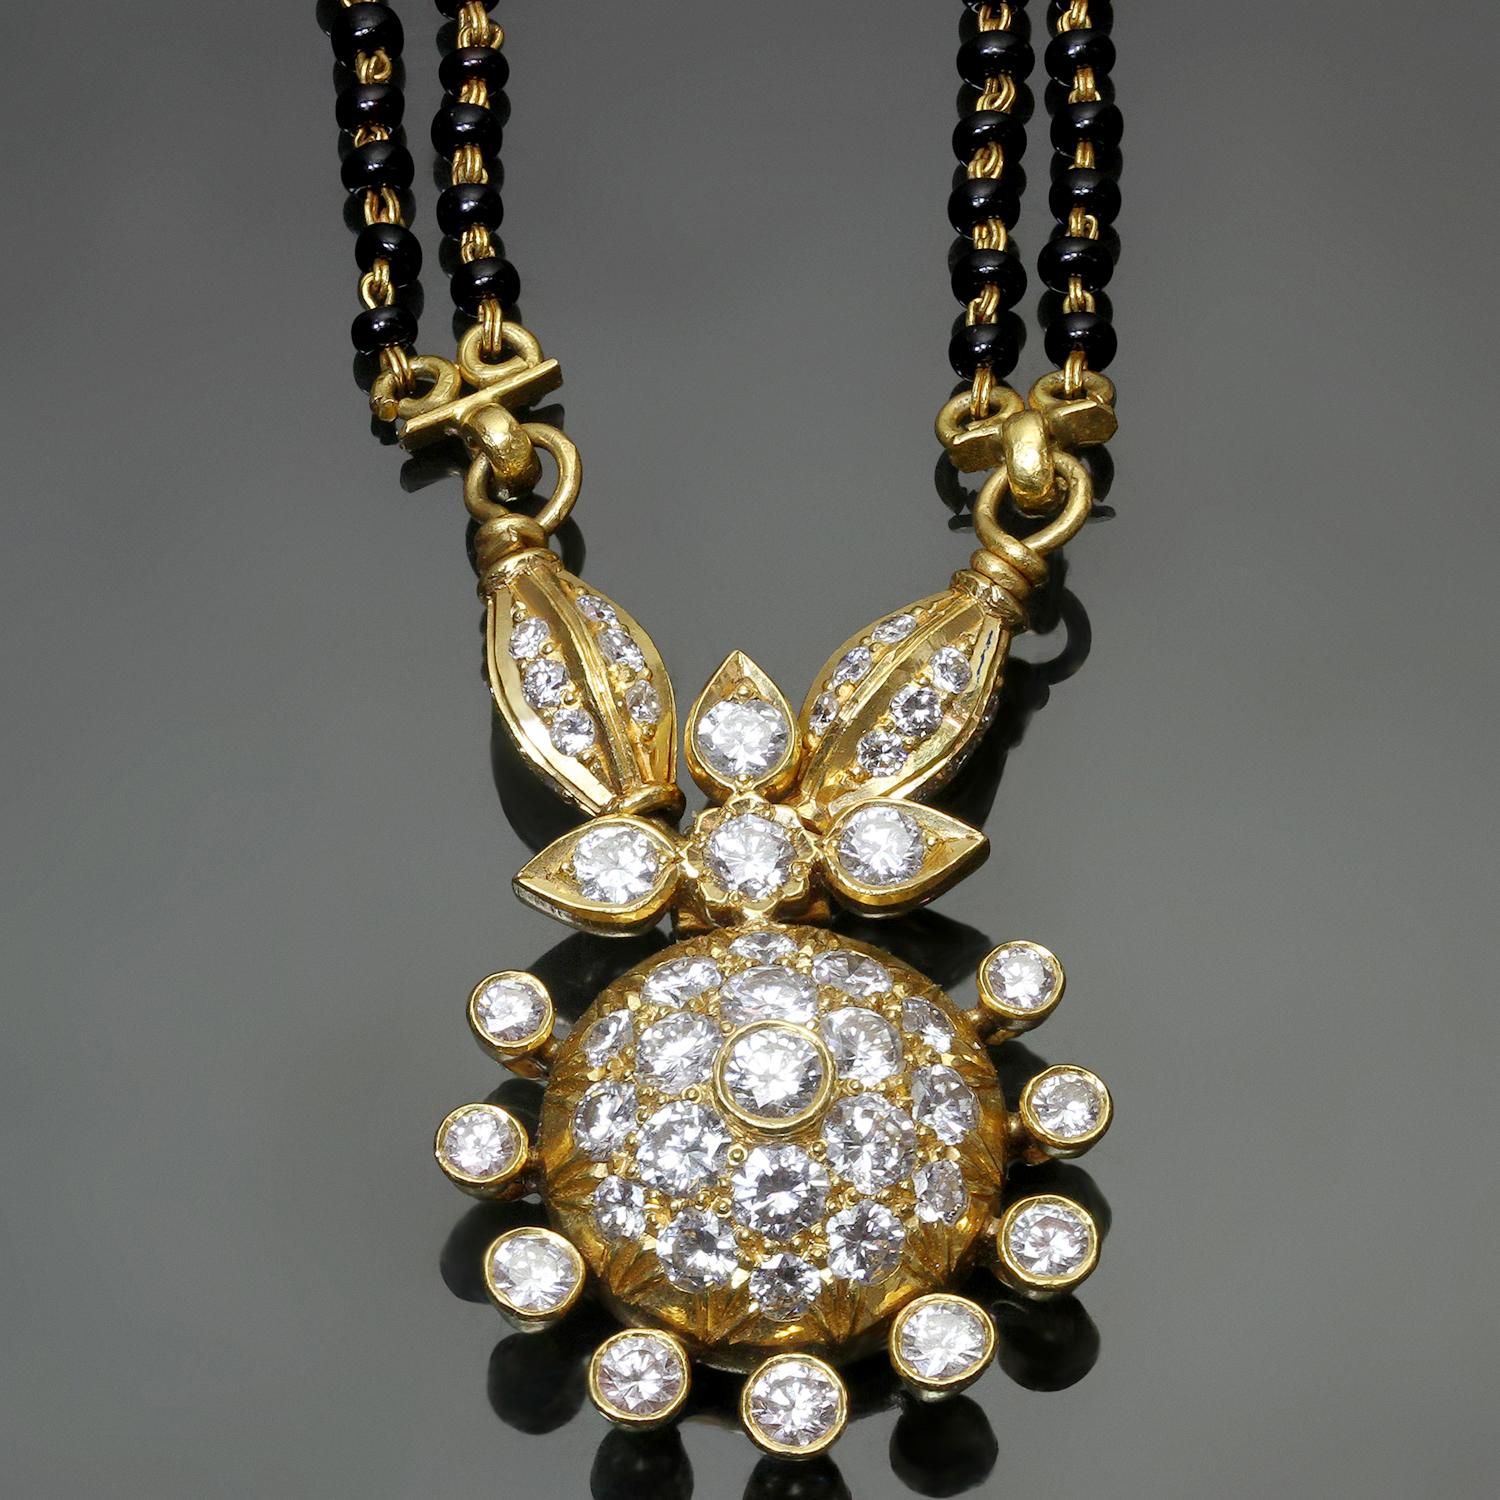 This gorgeous bridal Mangalsutra necklace is hand-crafted in 22k yellow gold and features 2 rows of black onyx beads completed with a sparkling pendant set with 68 round diamonds of an estimated 3.08 carats D-E-F color, VVS-VS clarity.